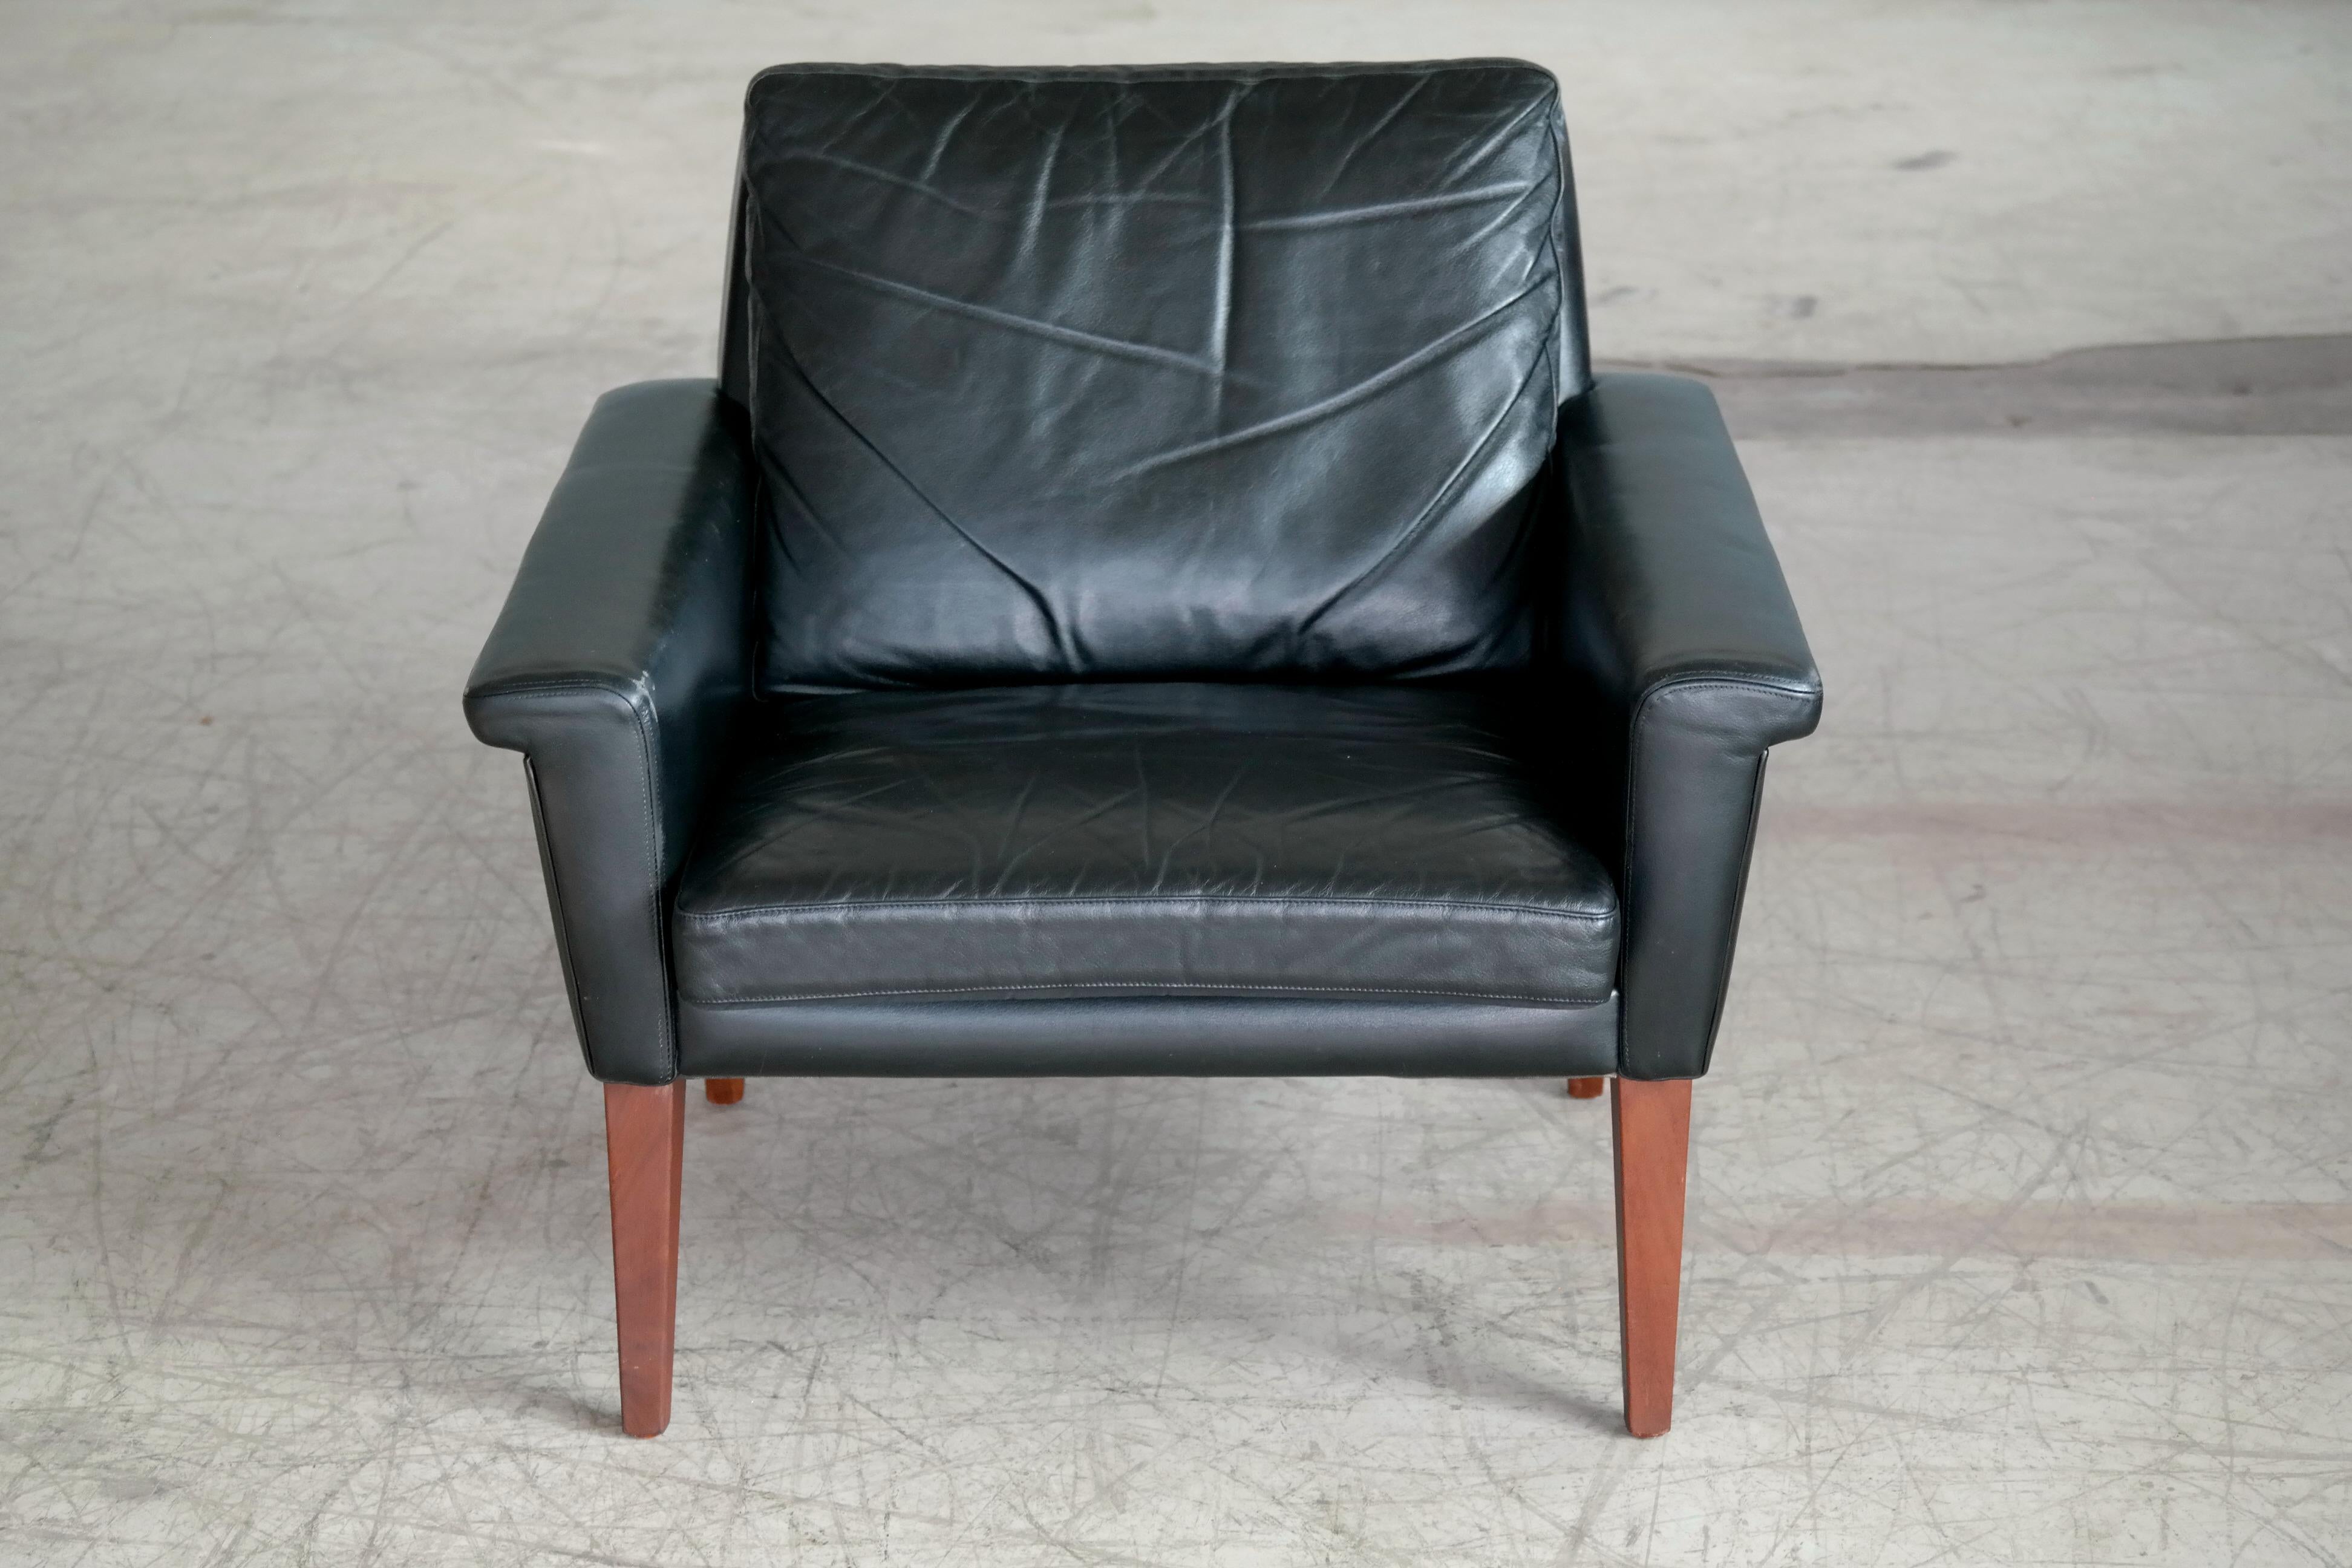 Classic Scandinavian easy chair in black leather attributed to Swedish Designer, Folke Jansson and likely made in the late 1960s. The chair's sharp angles combined with squared tapered legs in solid teak provides for a very elegant and dynamic look